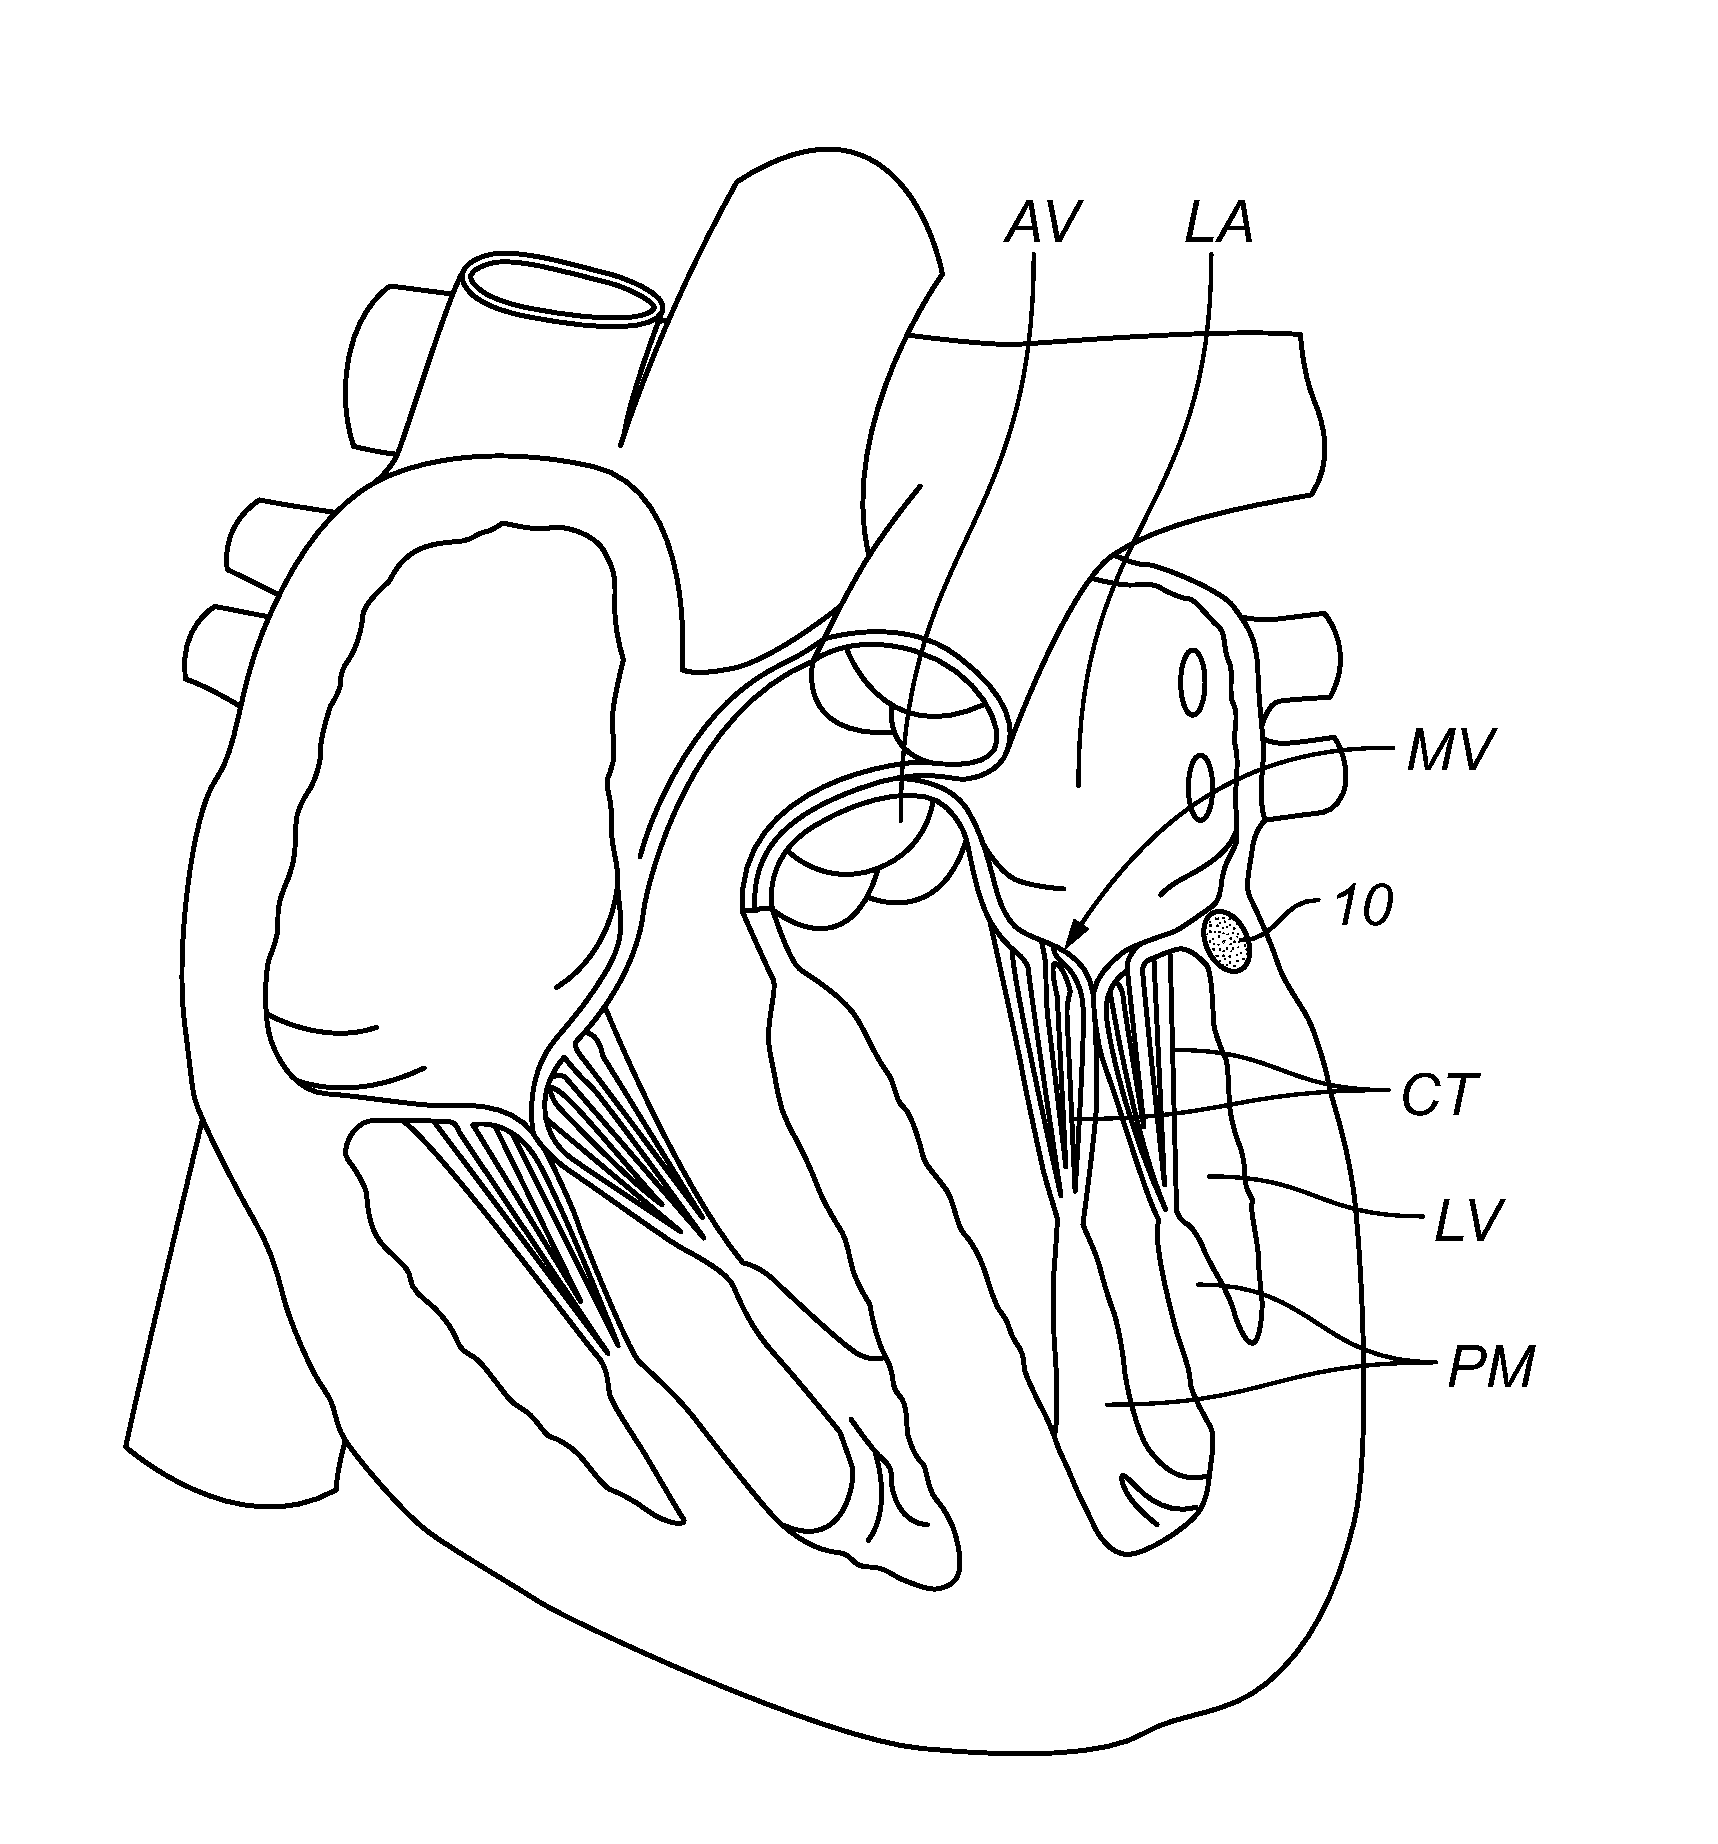 Repair of Incompetent Heart Valves by Interstitial Implantation of Space Occupying Materials or Devices